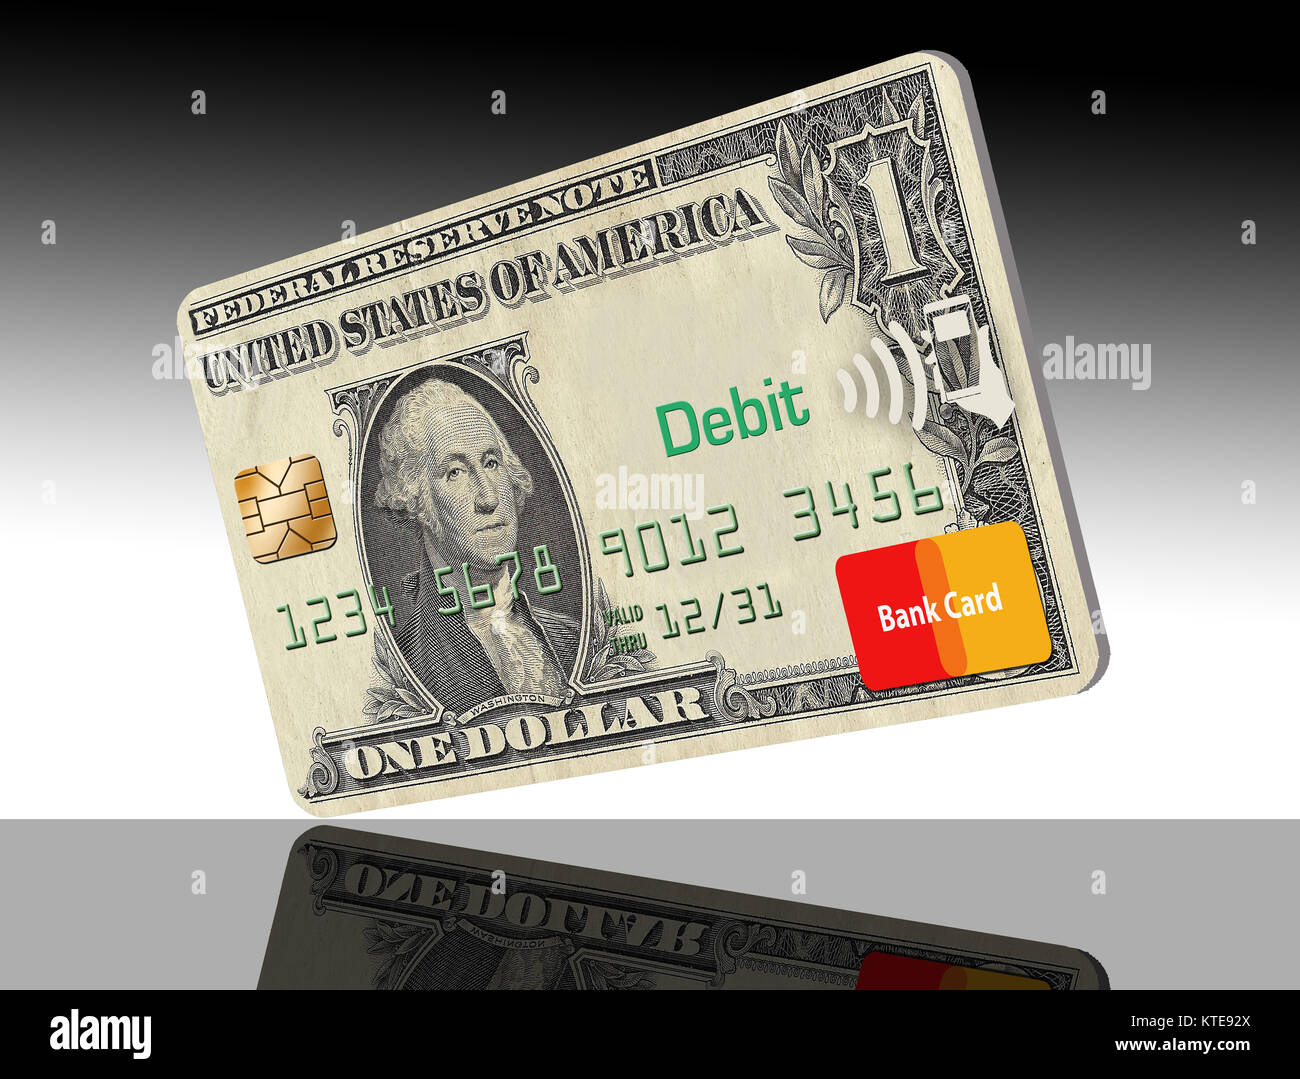 Go cashless. A credit card looks like a one dollar bill. That idea is the theme of this 3-D illustration Credit cards replace the need to carry cash. Stock Photo